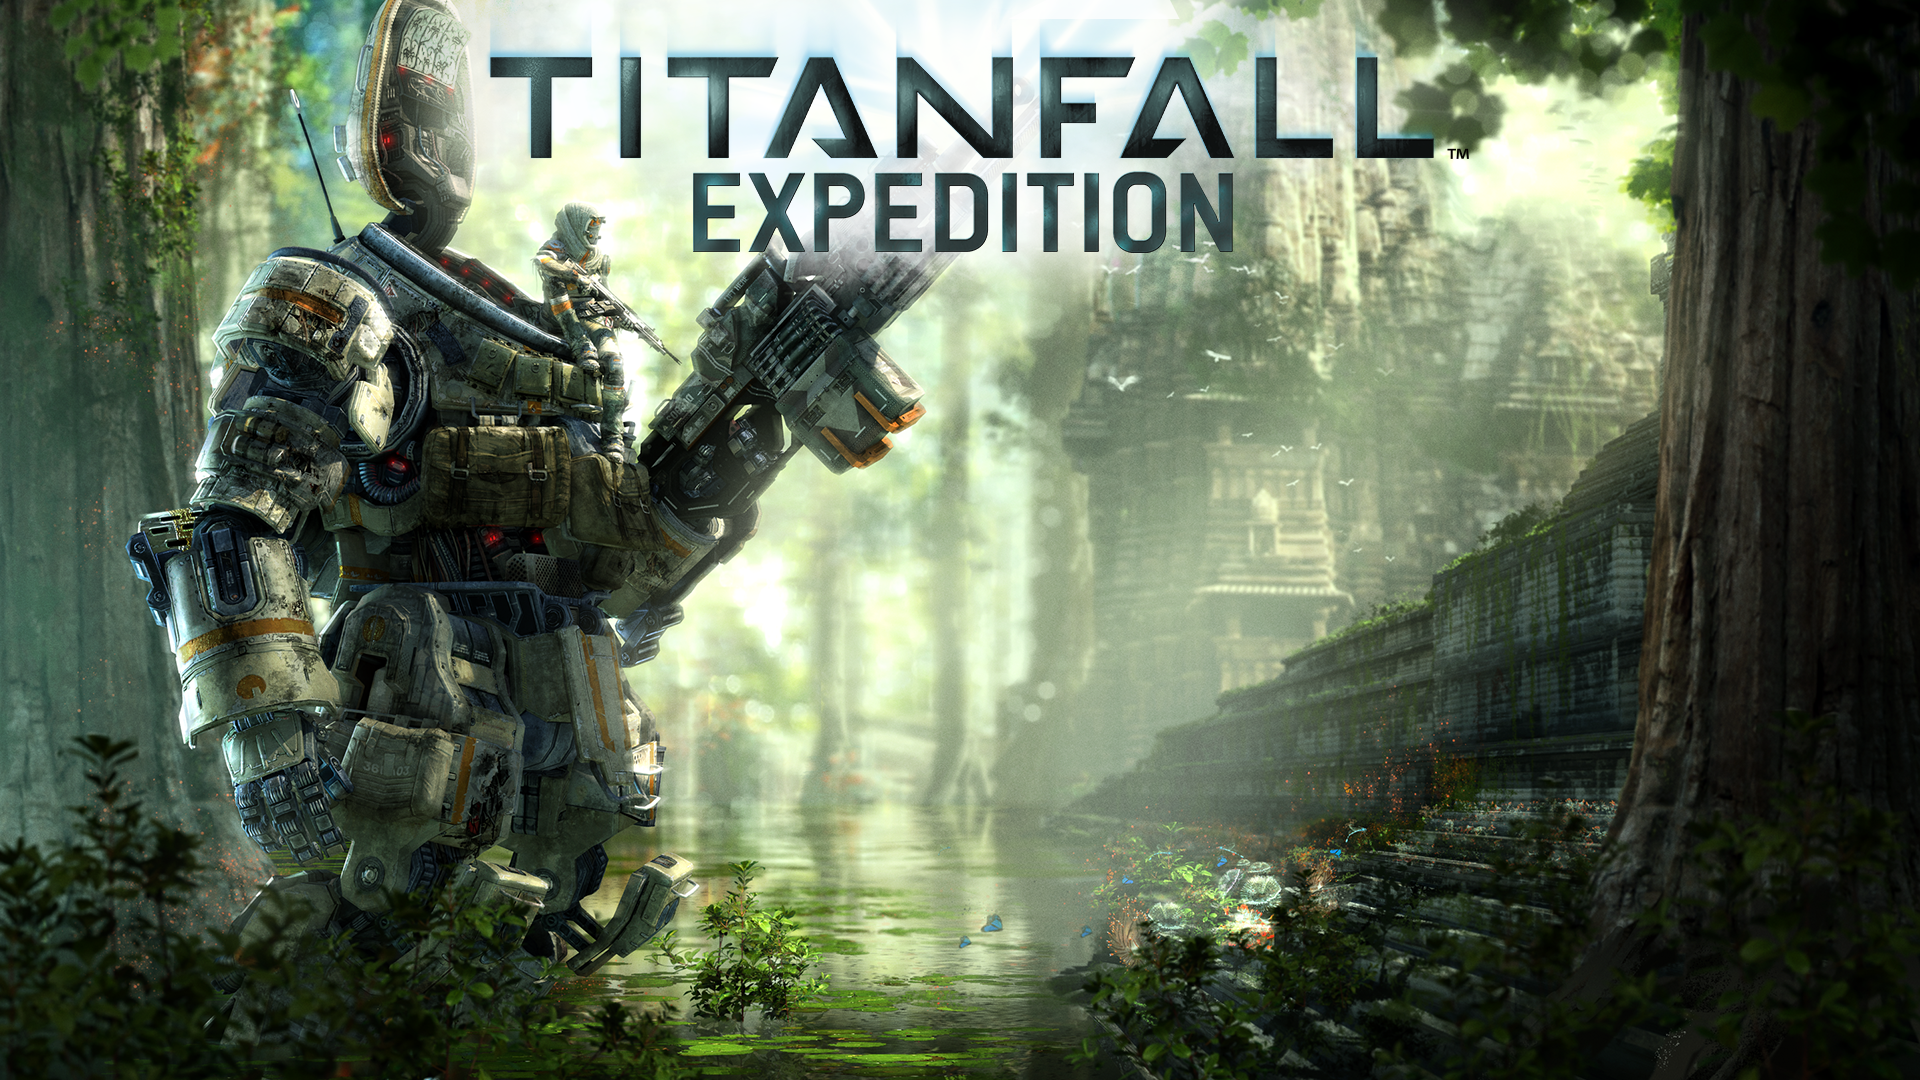 Titanfall Expedition